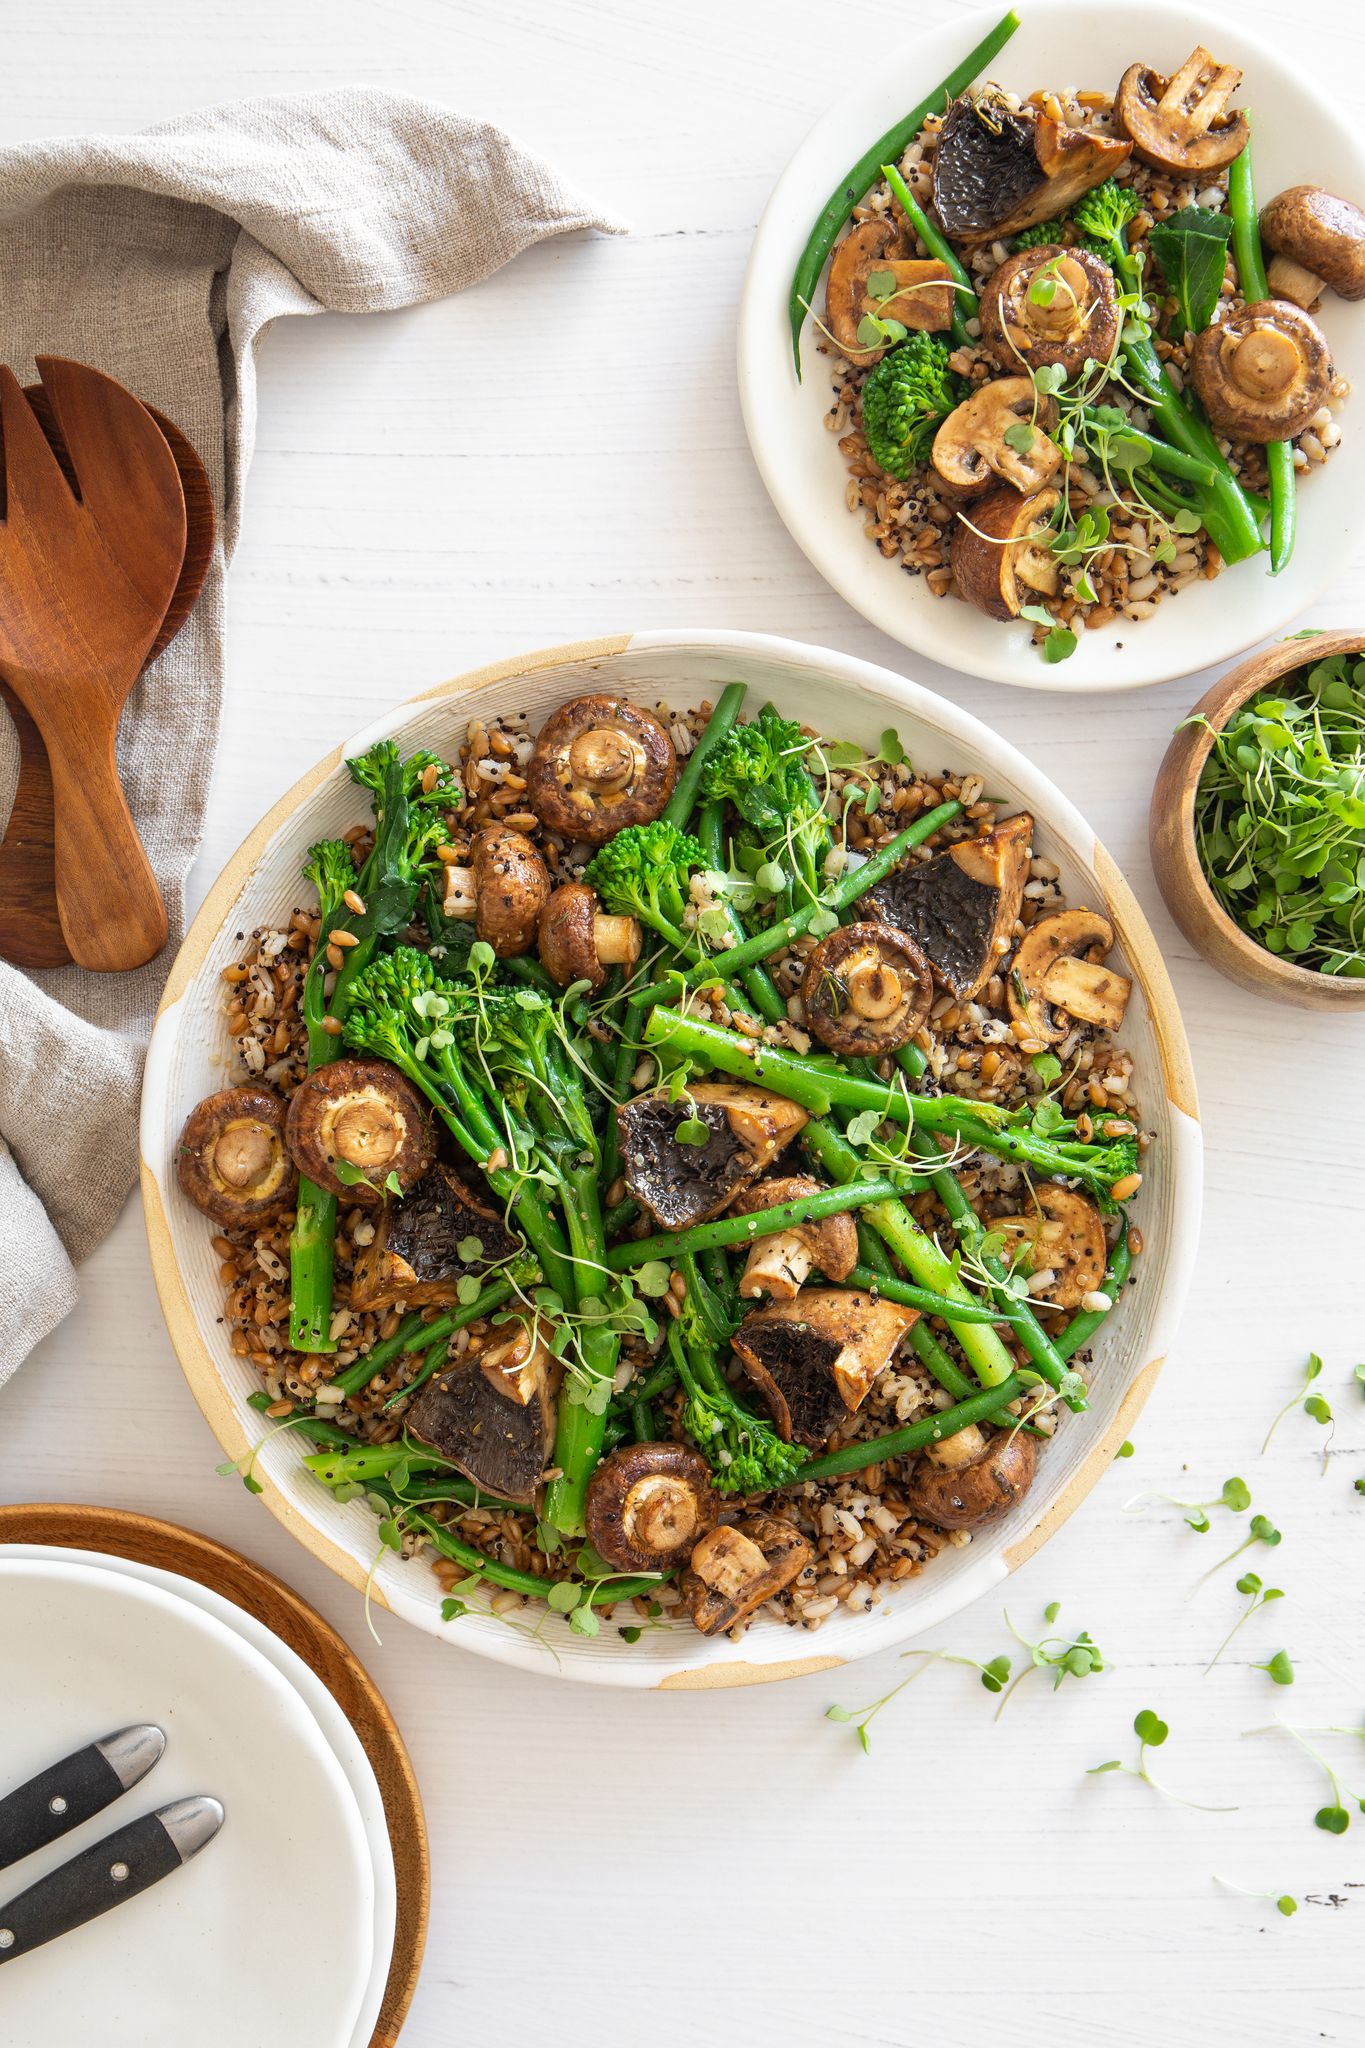 You are currently viewing <strong>Balsamic Mushrooms with Beans, Broccoli & Ancient Grains</strong>